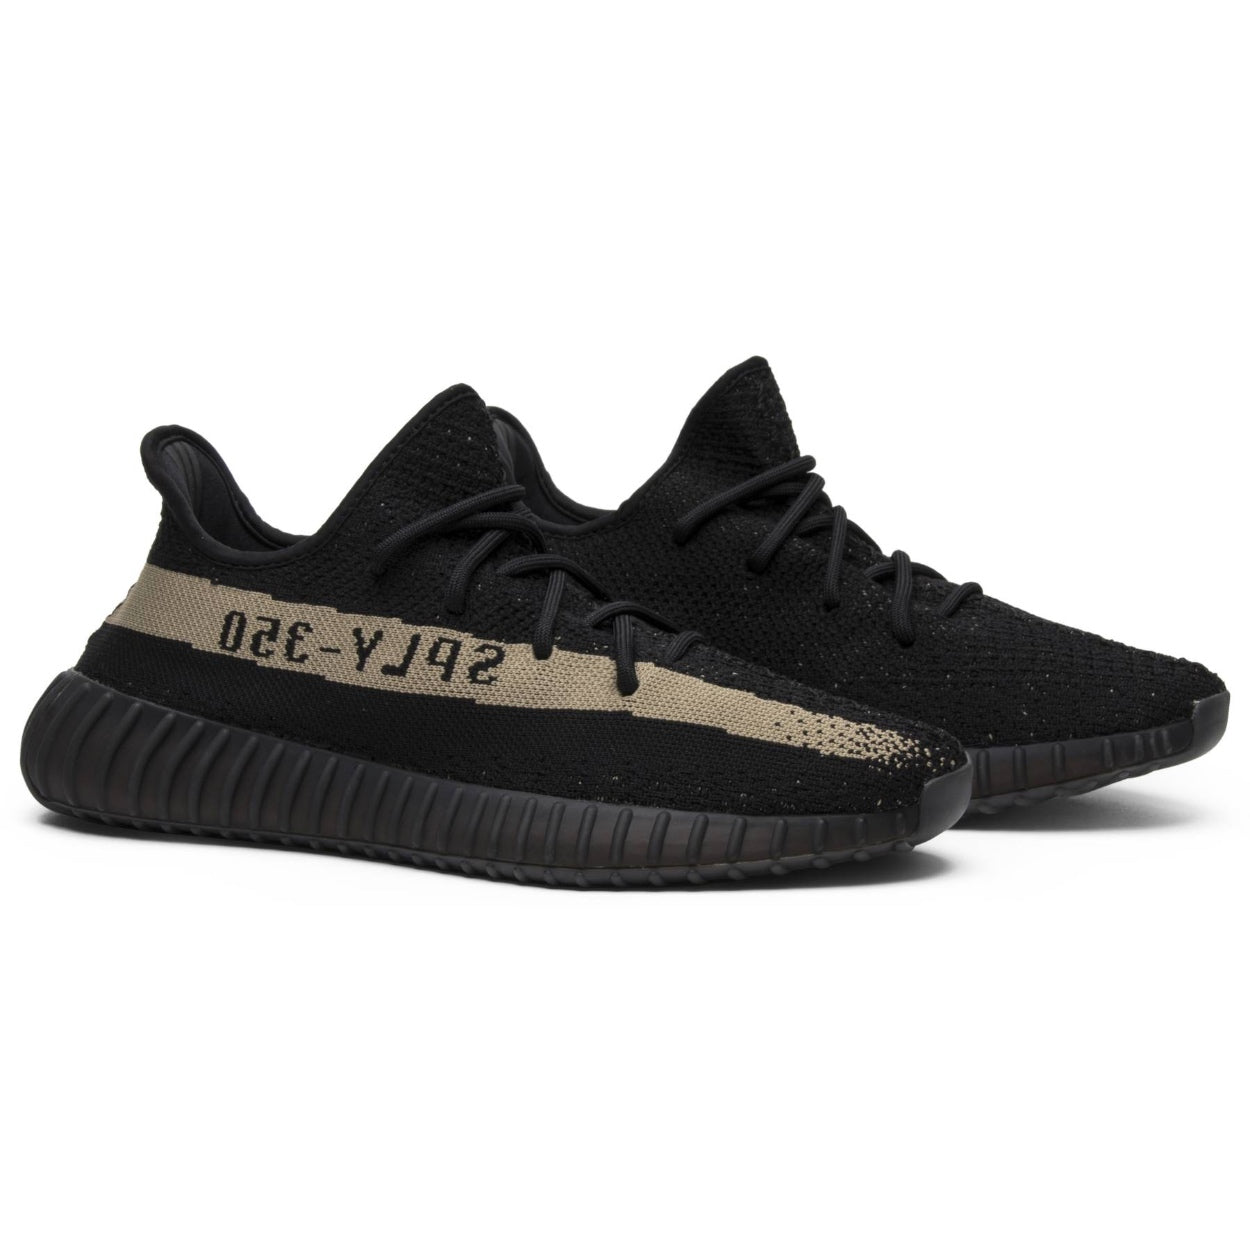 adidas Yeezy Boost 350 V2 'Core Black Green' - After Burn